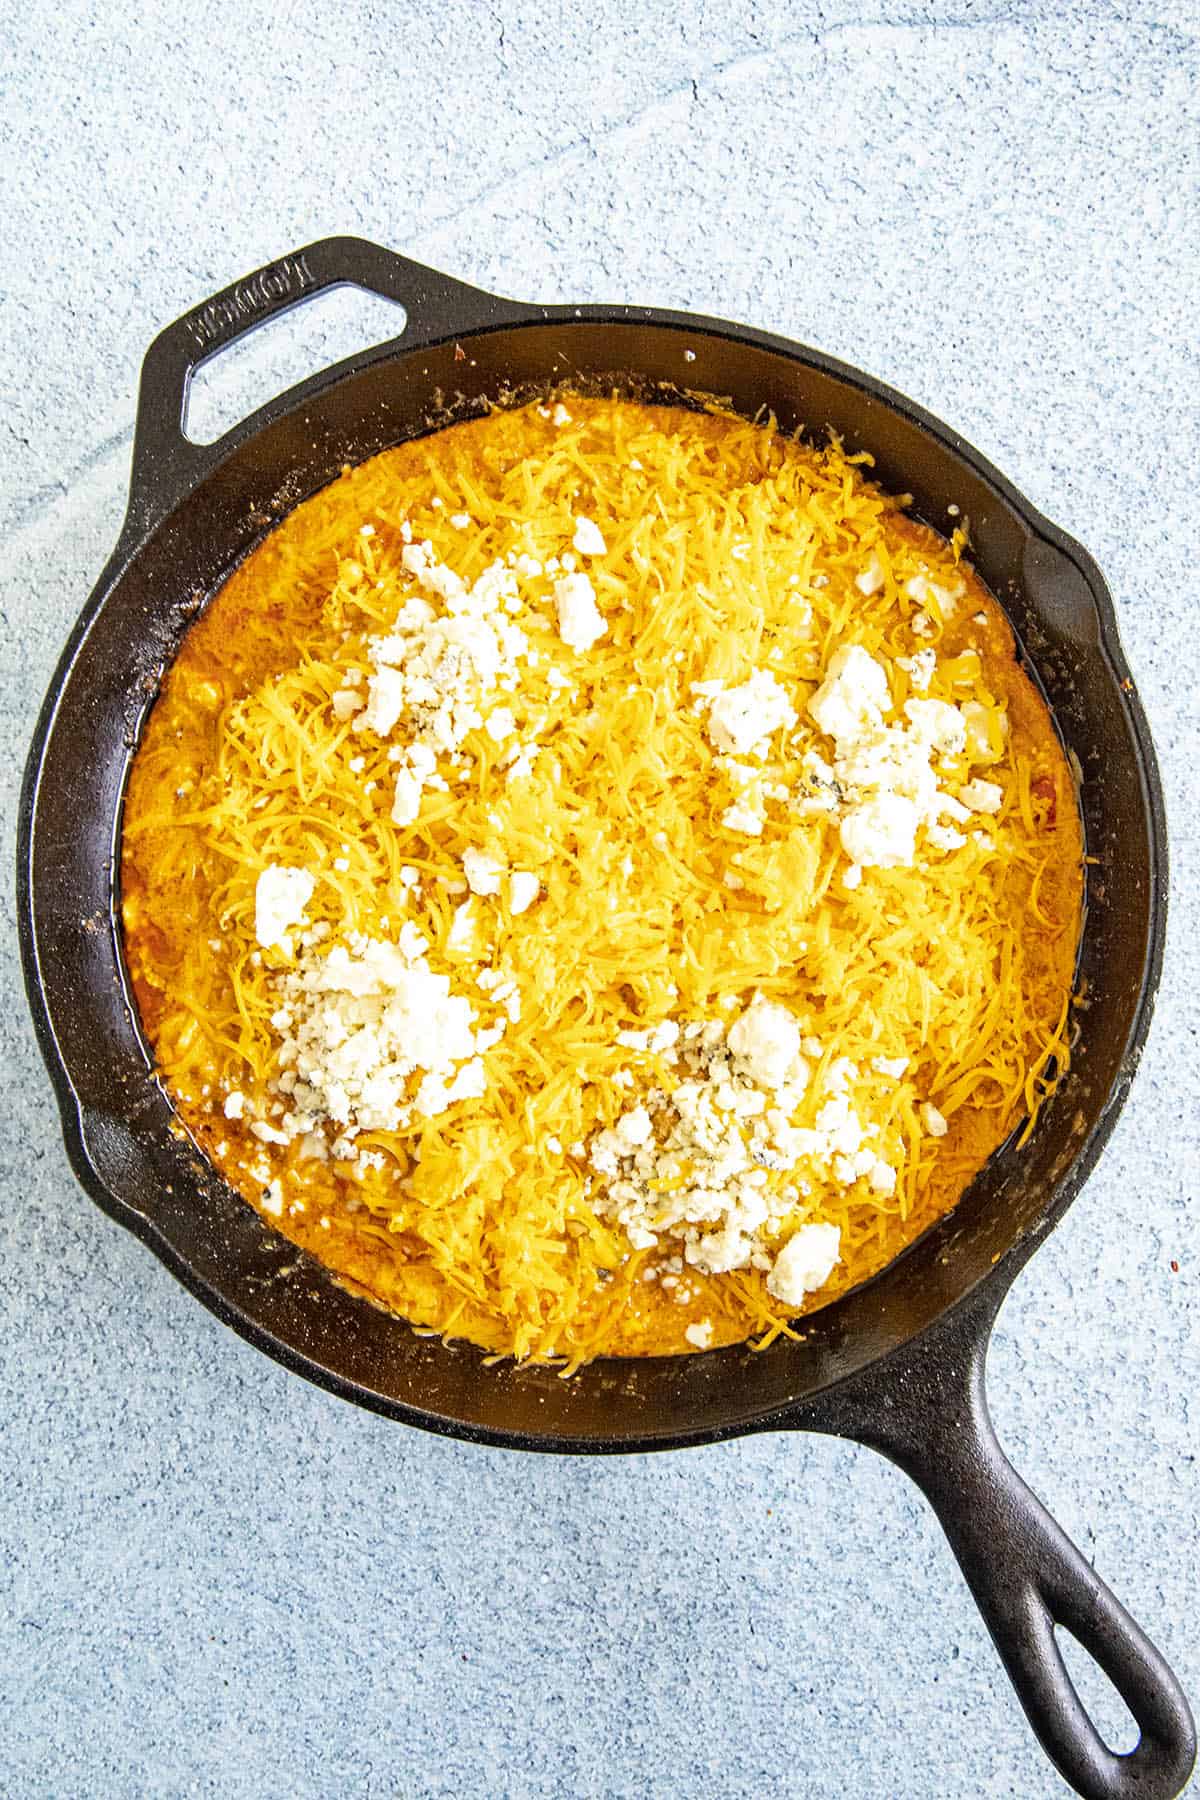 Topping the Buffalo Chicken Dip with shredded cheddar cheese